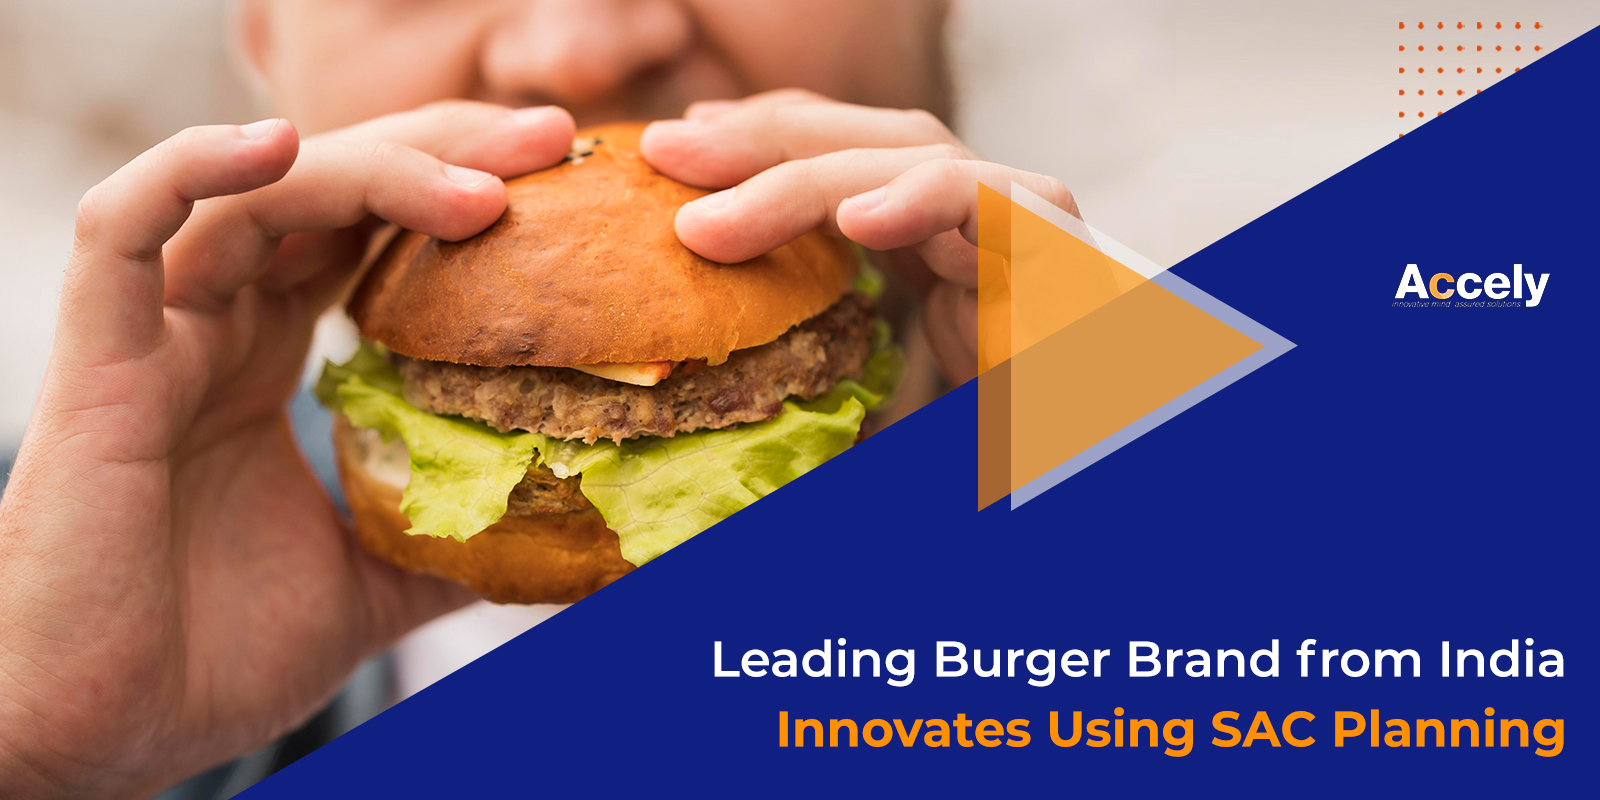 Leading Burger Brand from India Innovates Using SAC Planning